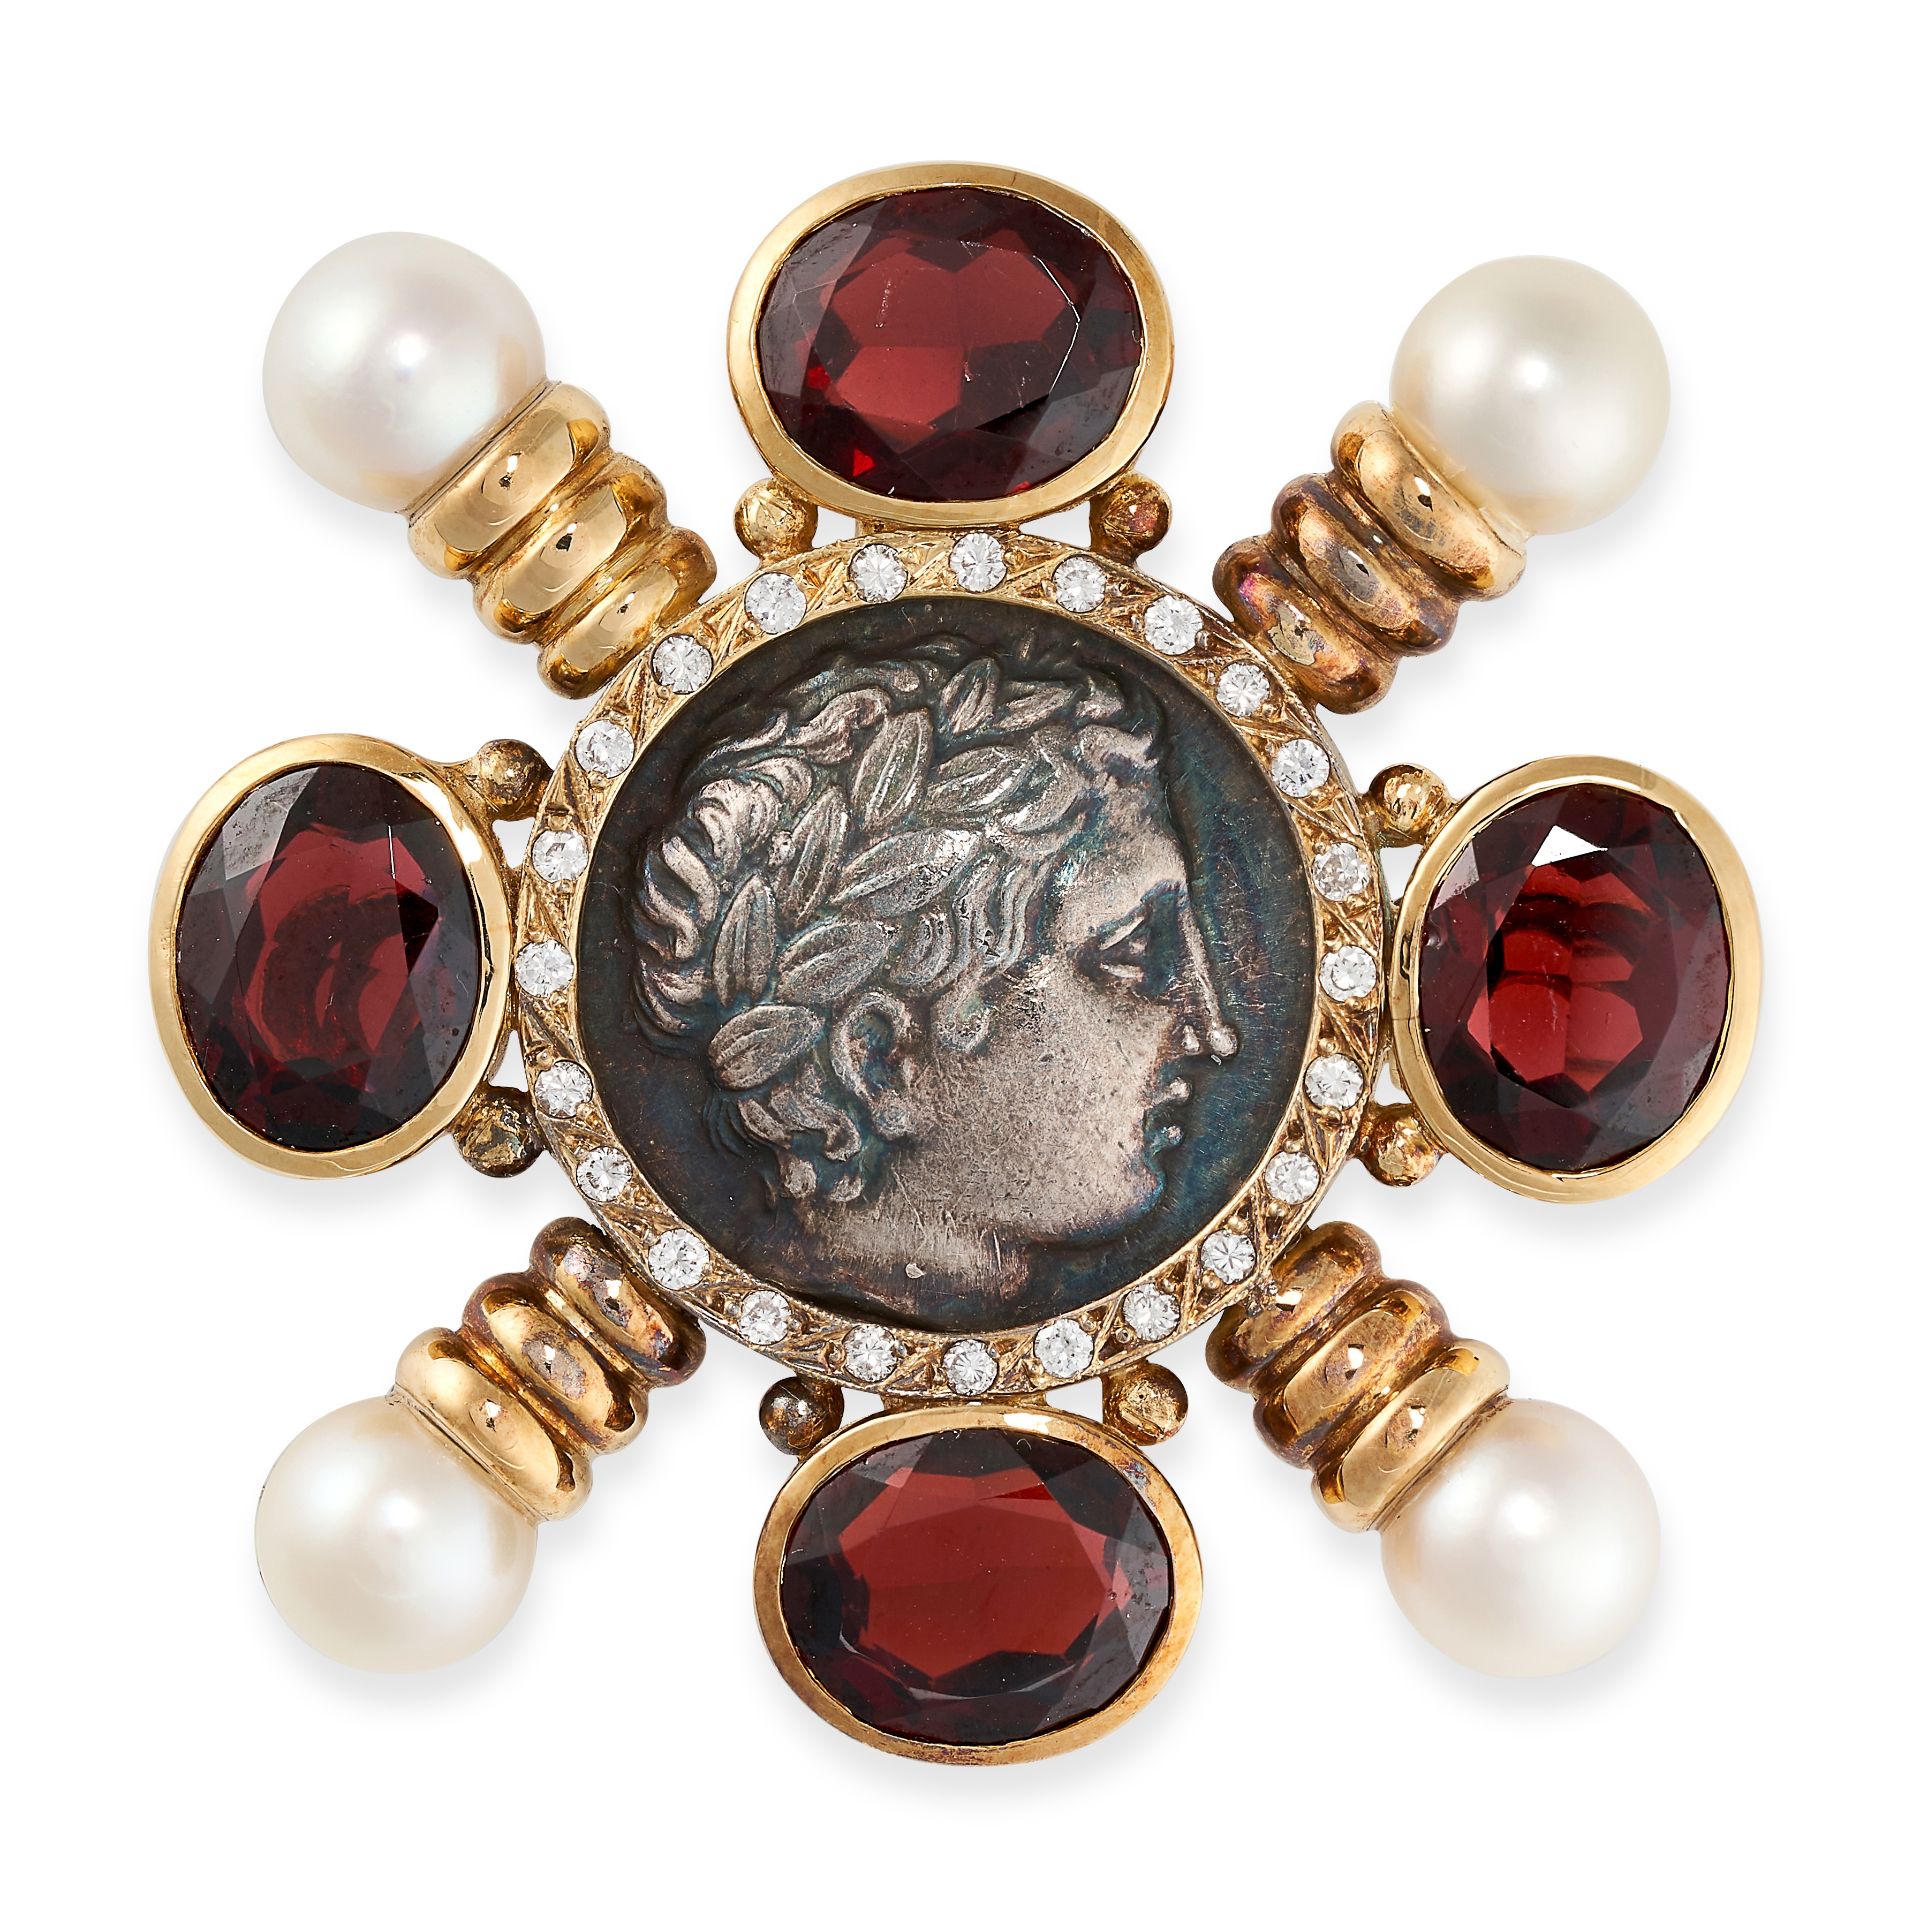 A DIAMOND, GARNET, PEARL AND ANCIENT GREEK COIN BROOCH in high carat yellow gold, comprising an